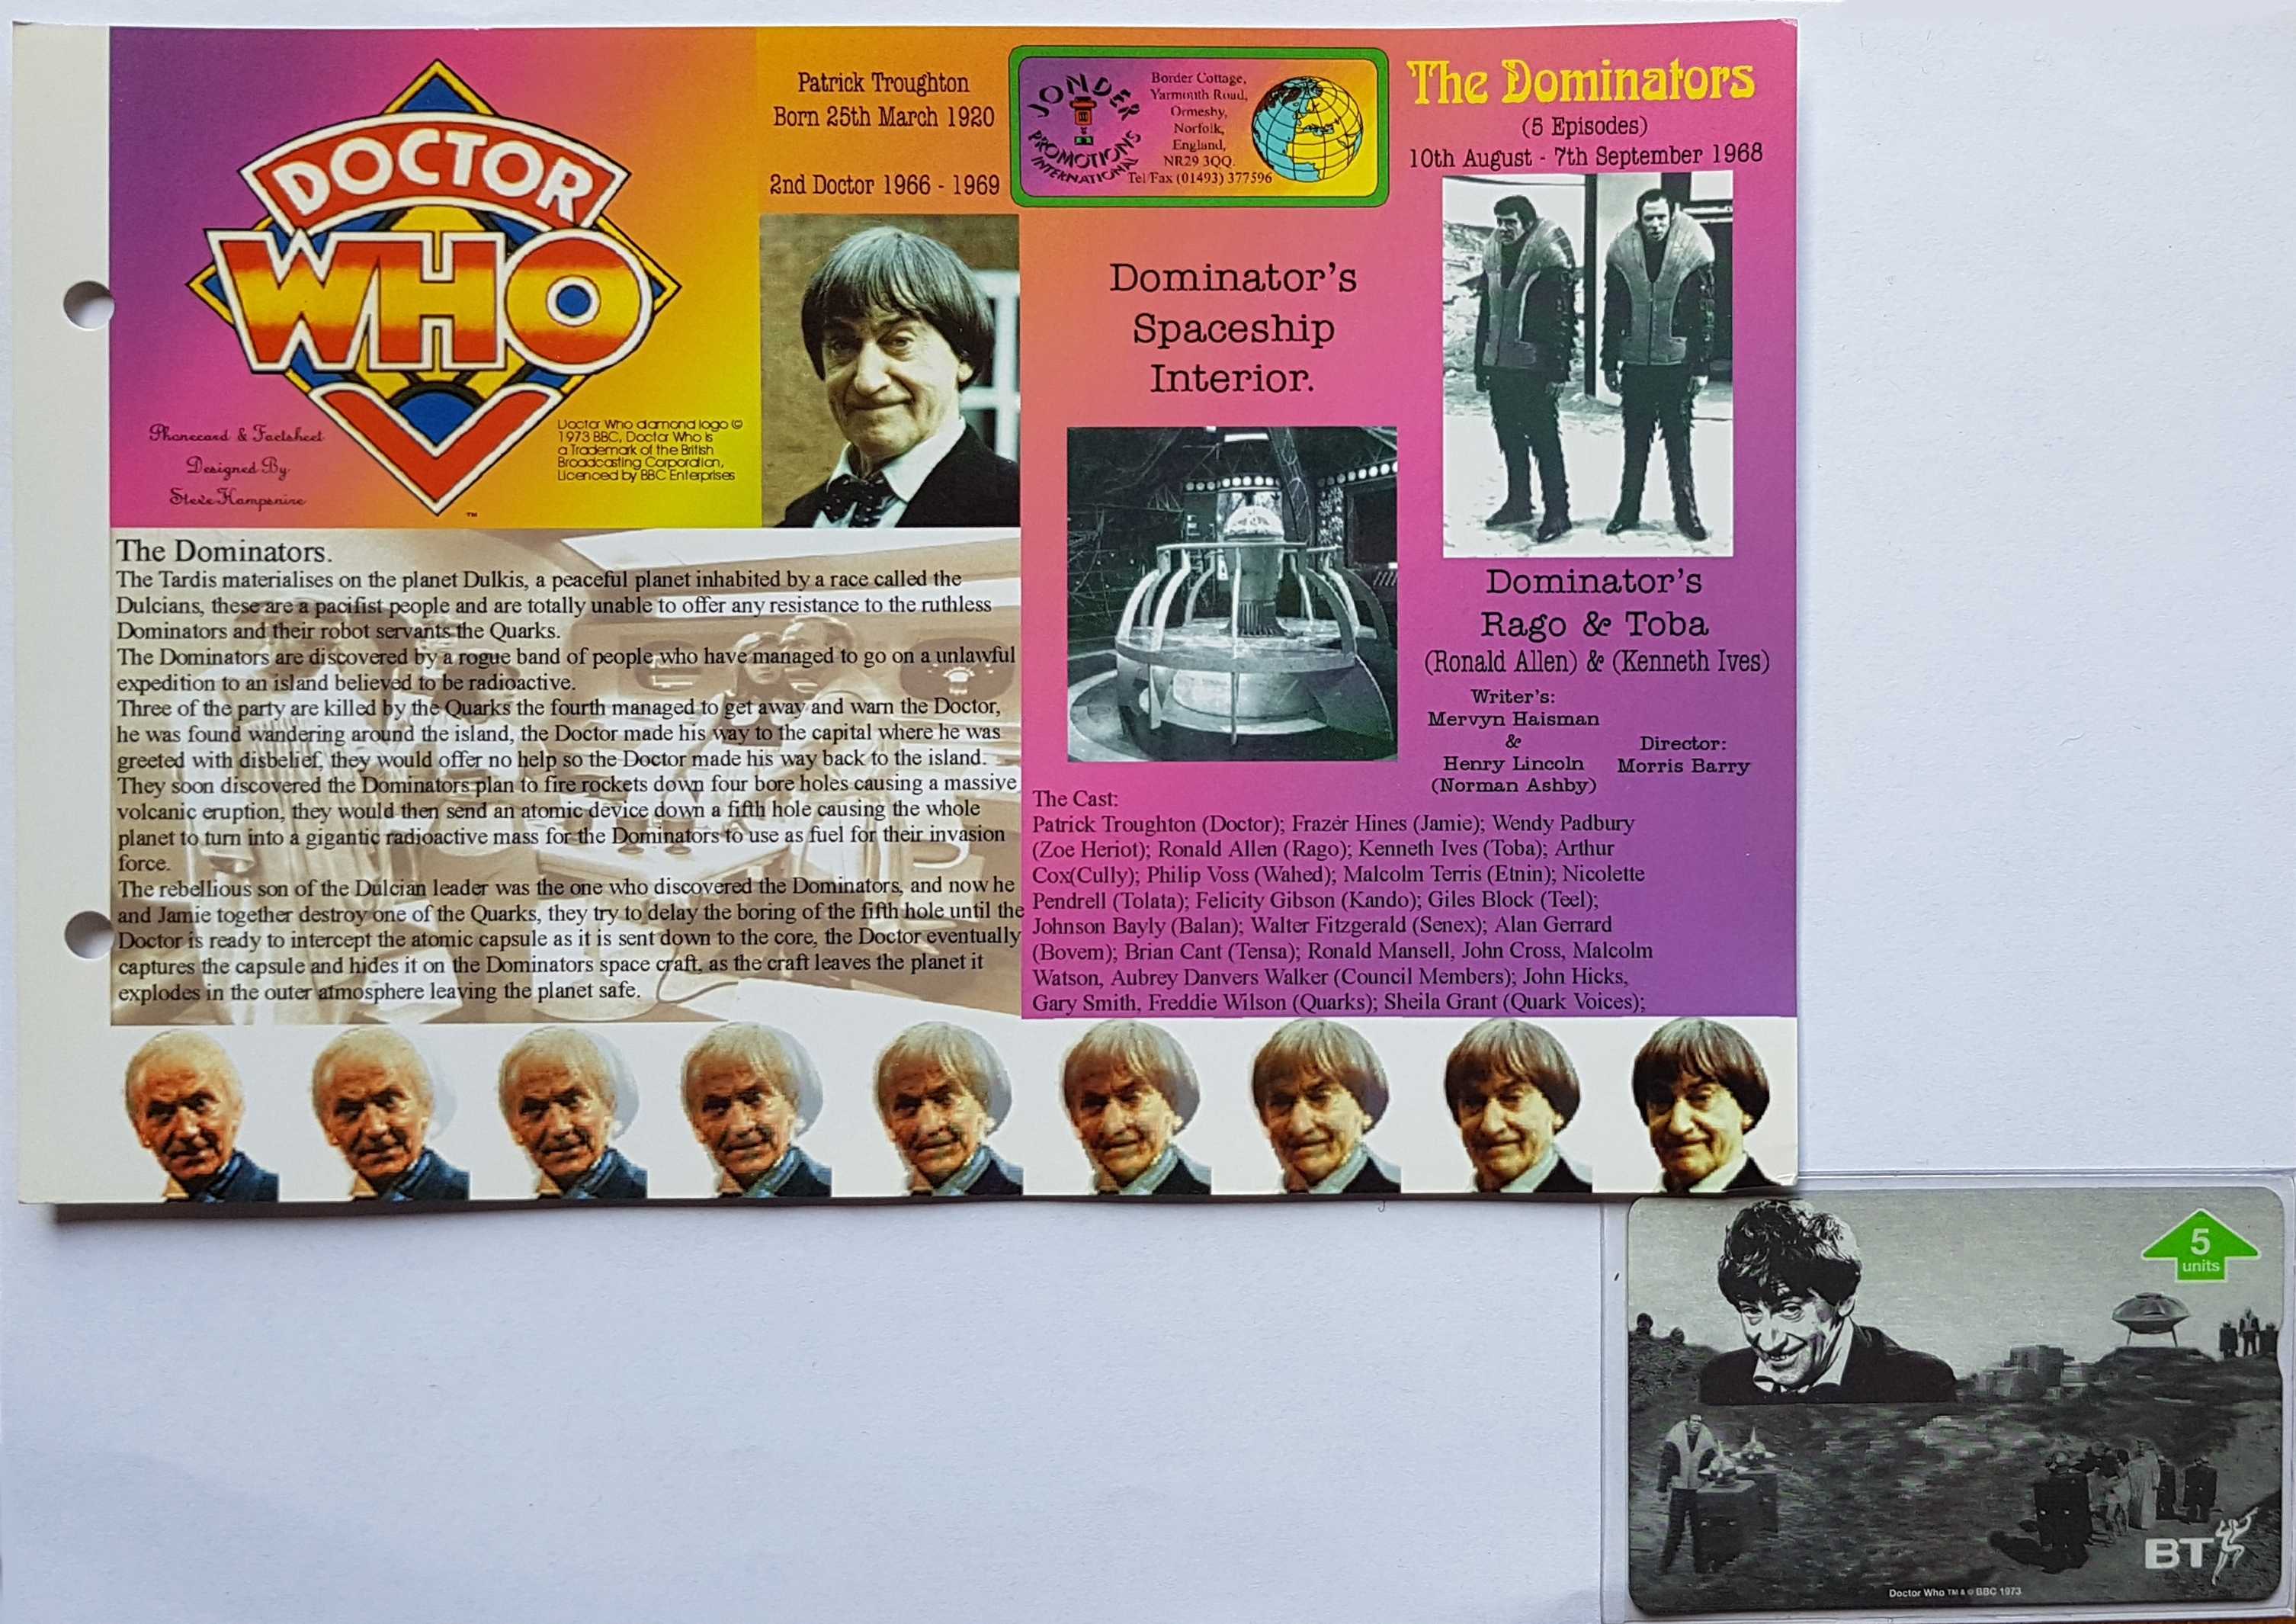 Picture of PC-BTG547 Doctor Who - The Dominators - Phone card by artist  from the BBC records and Tapes library